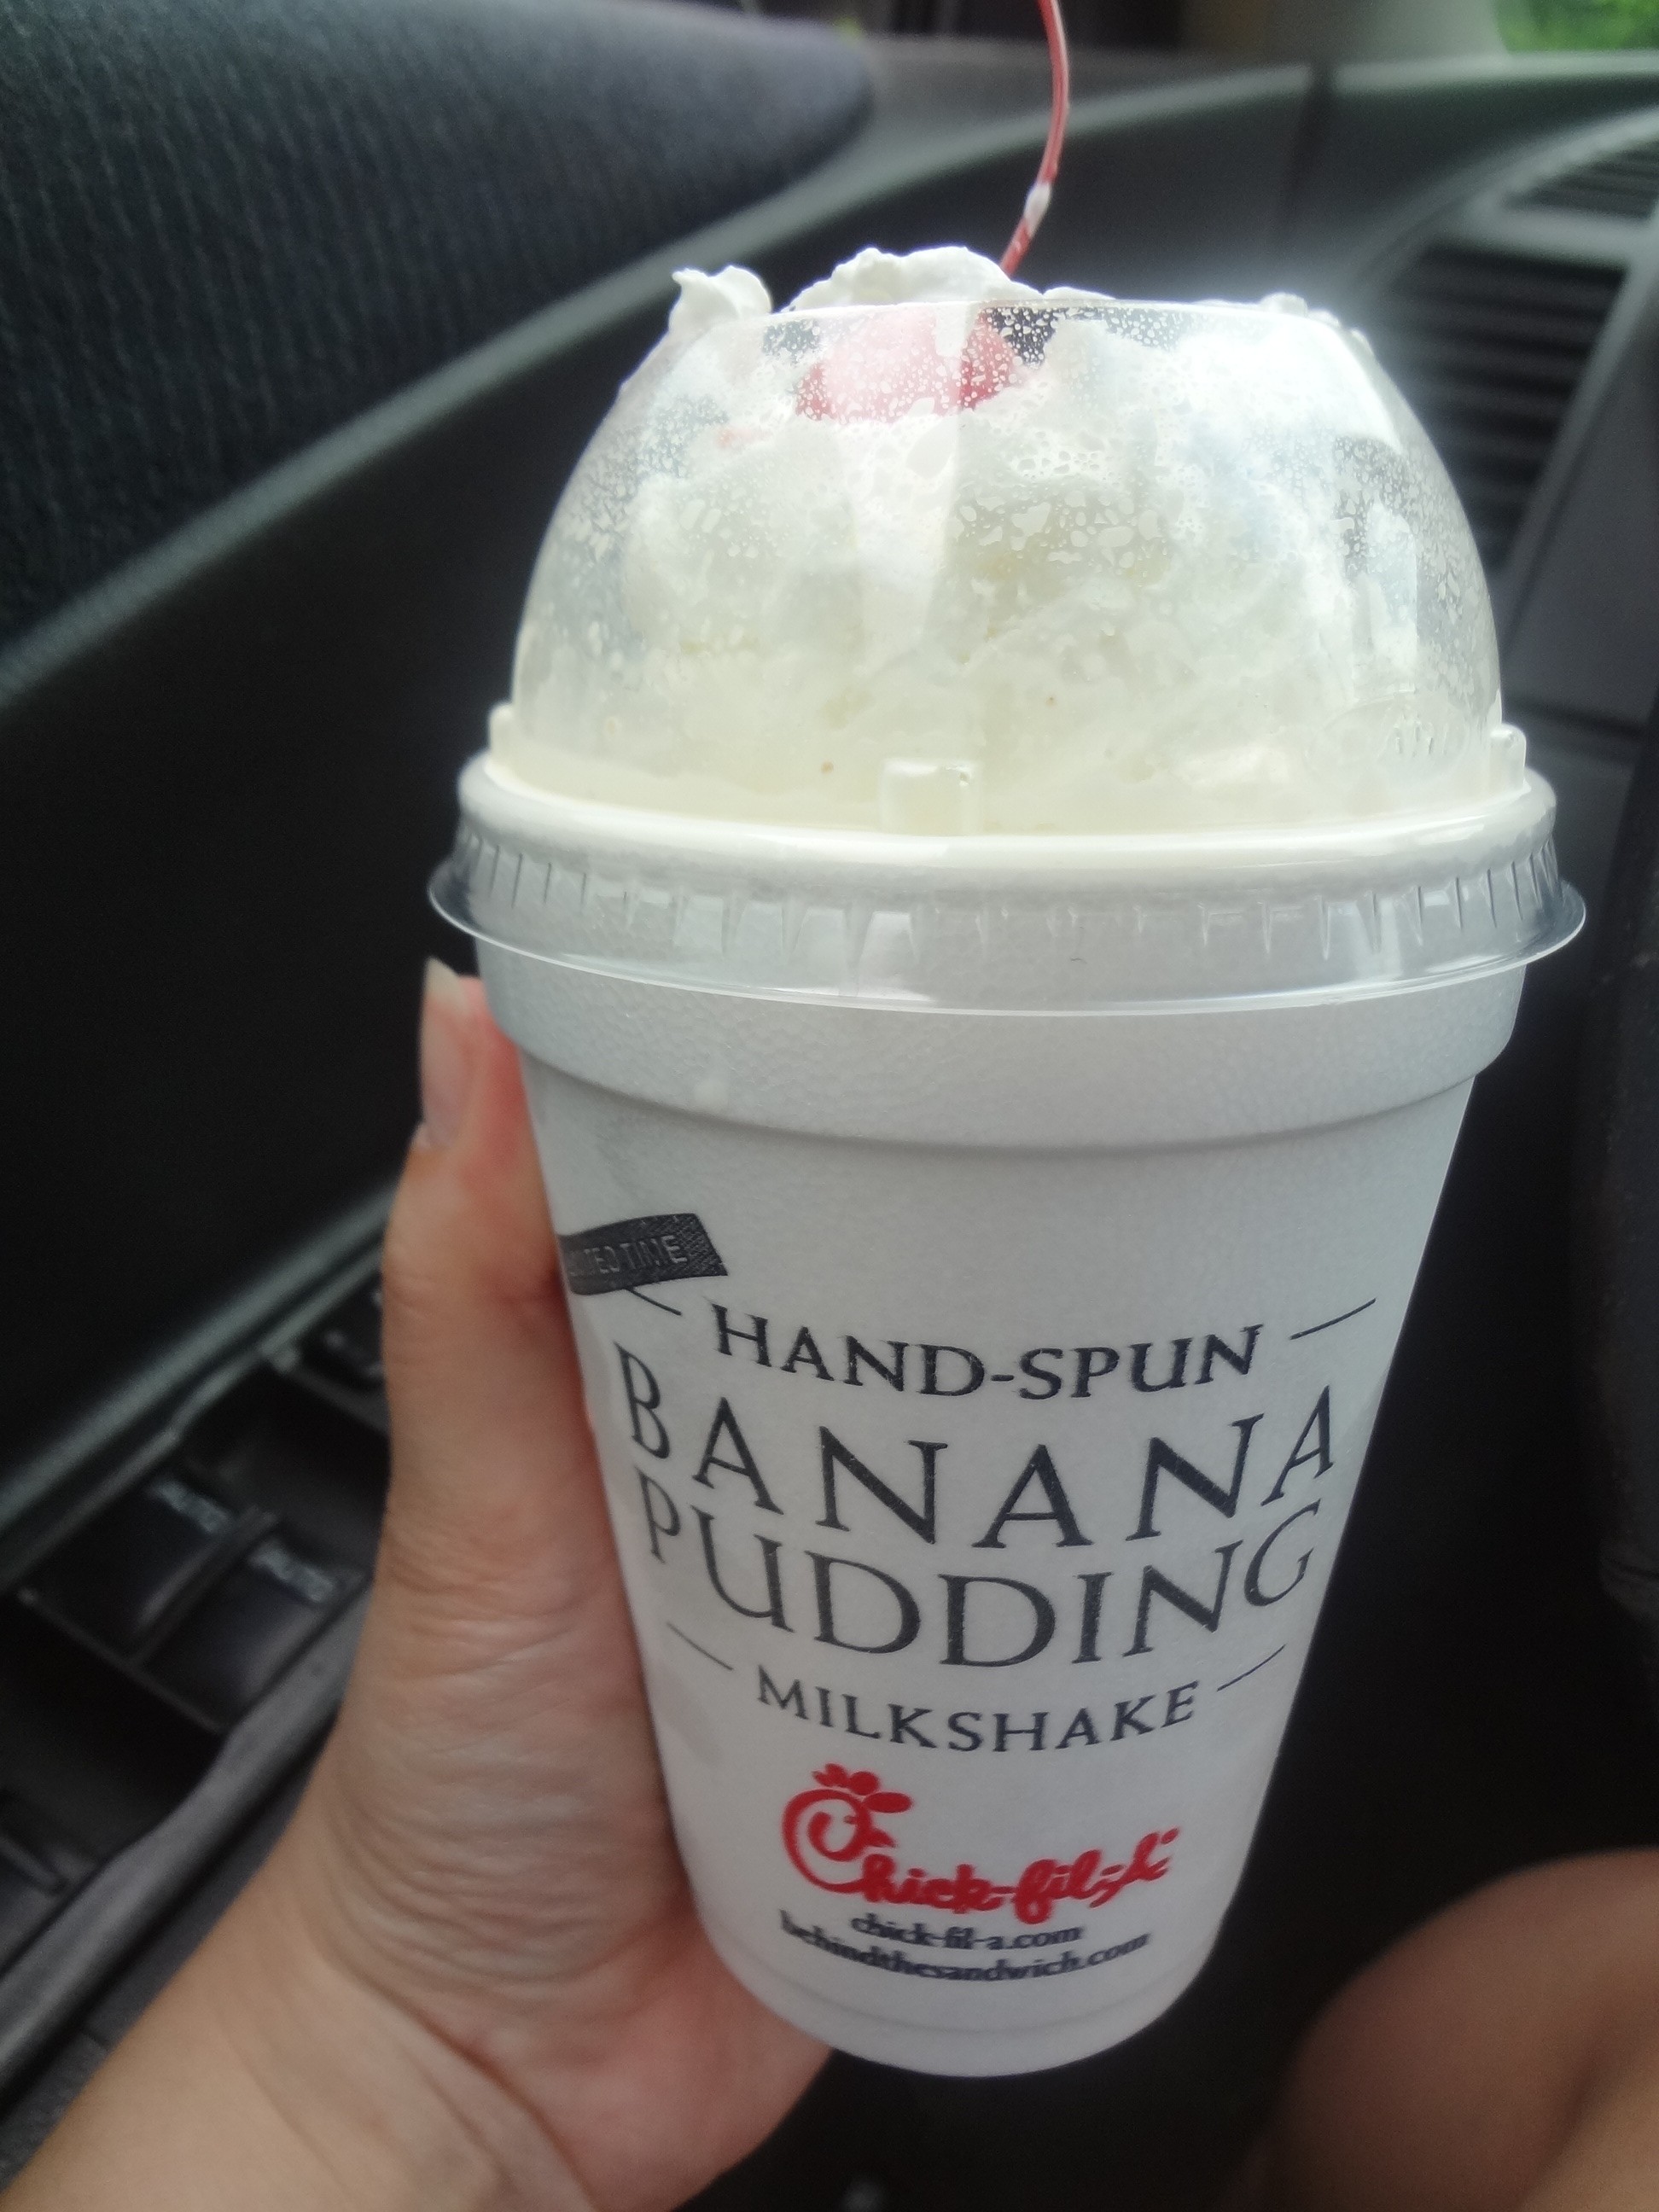 Does Chick Fil A have banana shakes?